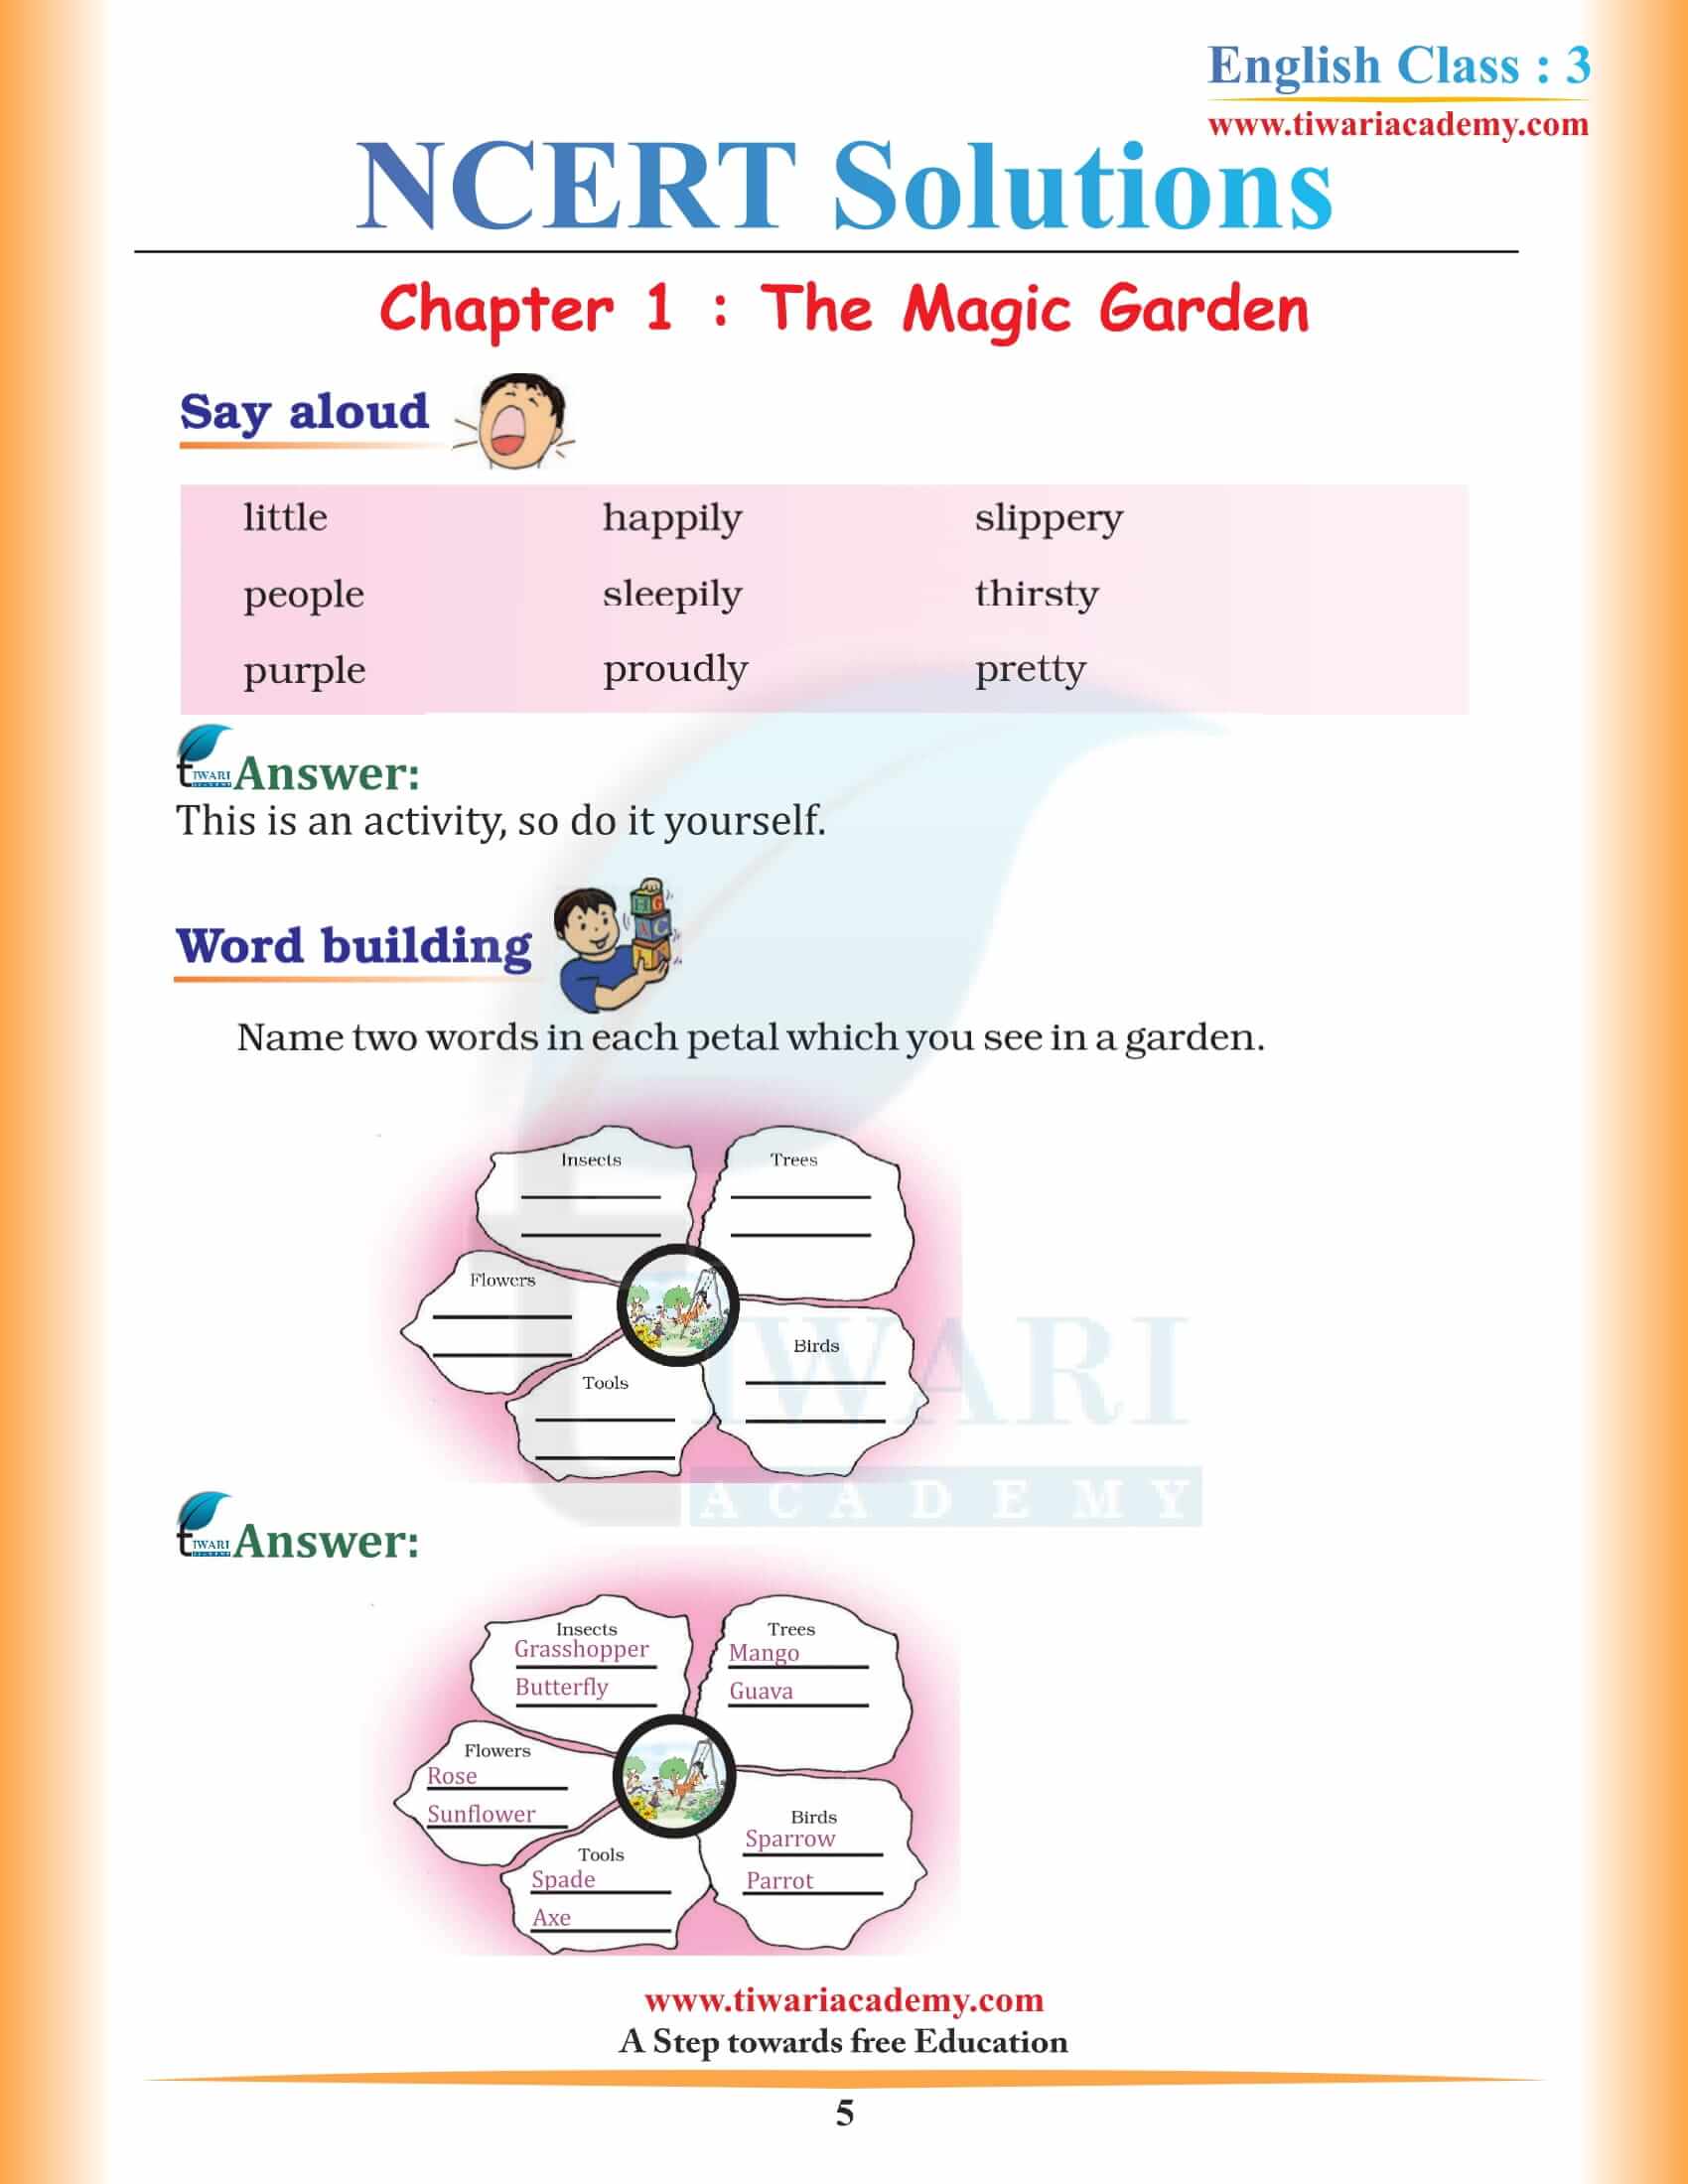 NCERT Solutions for Class 3 English Marigold Chapter 1